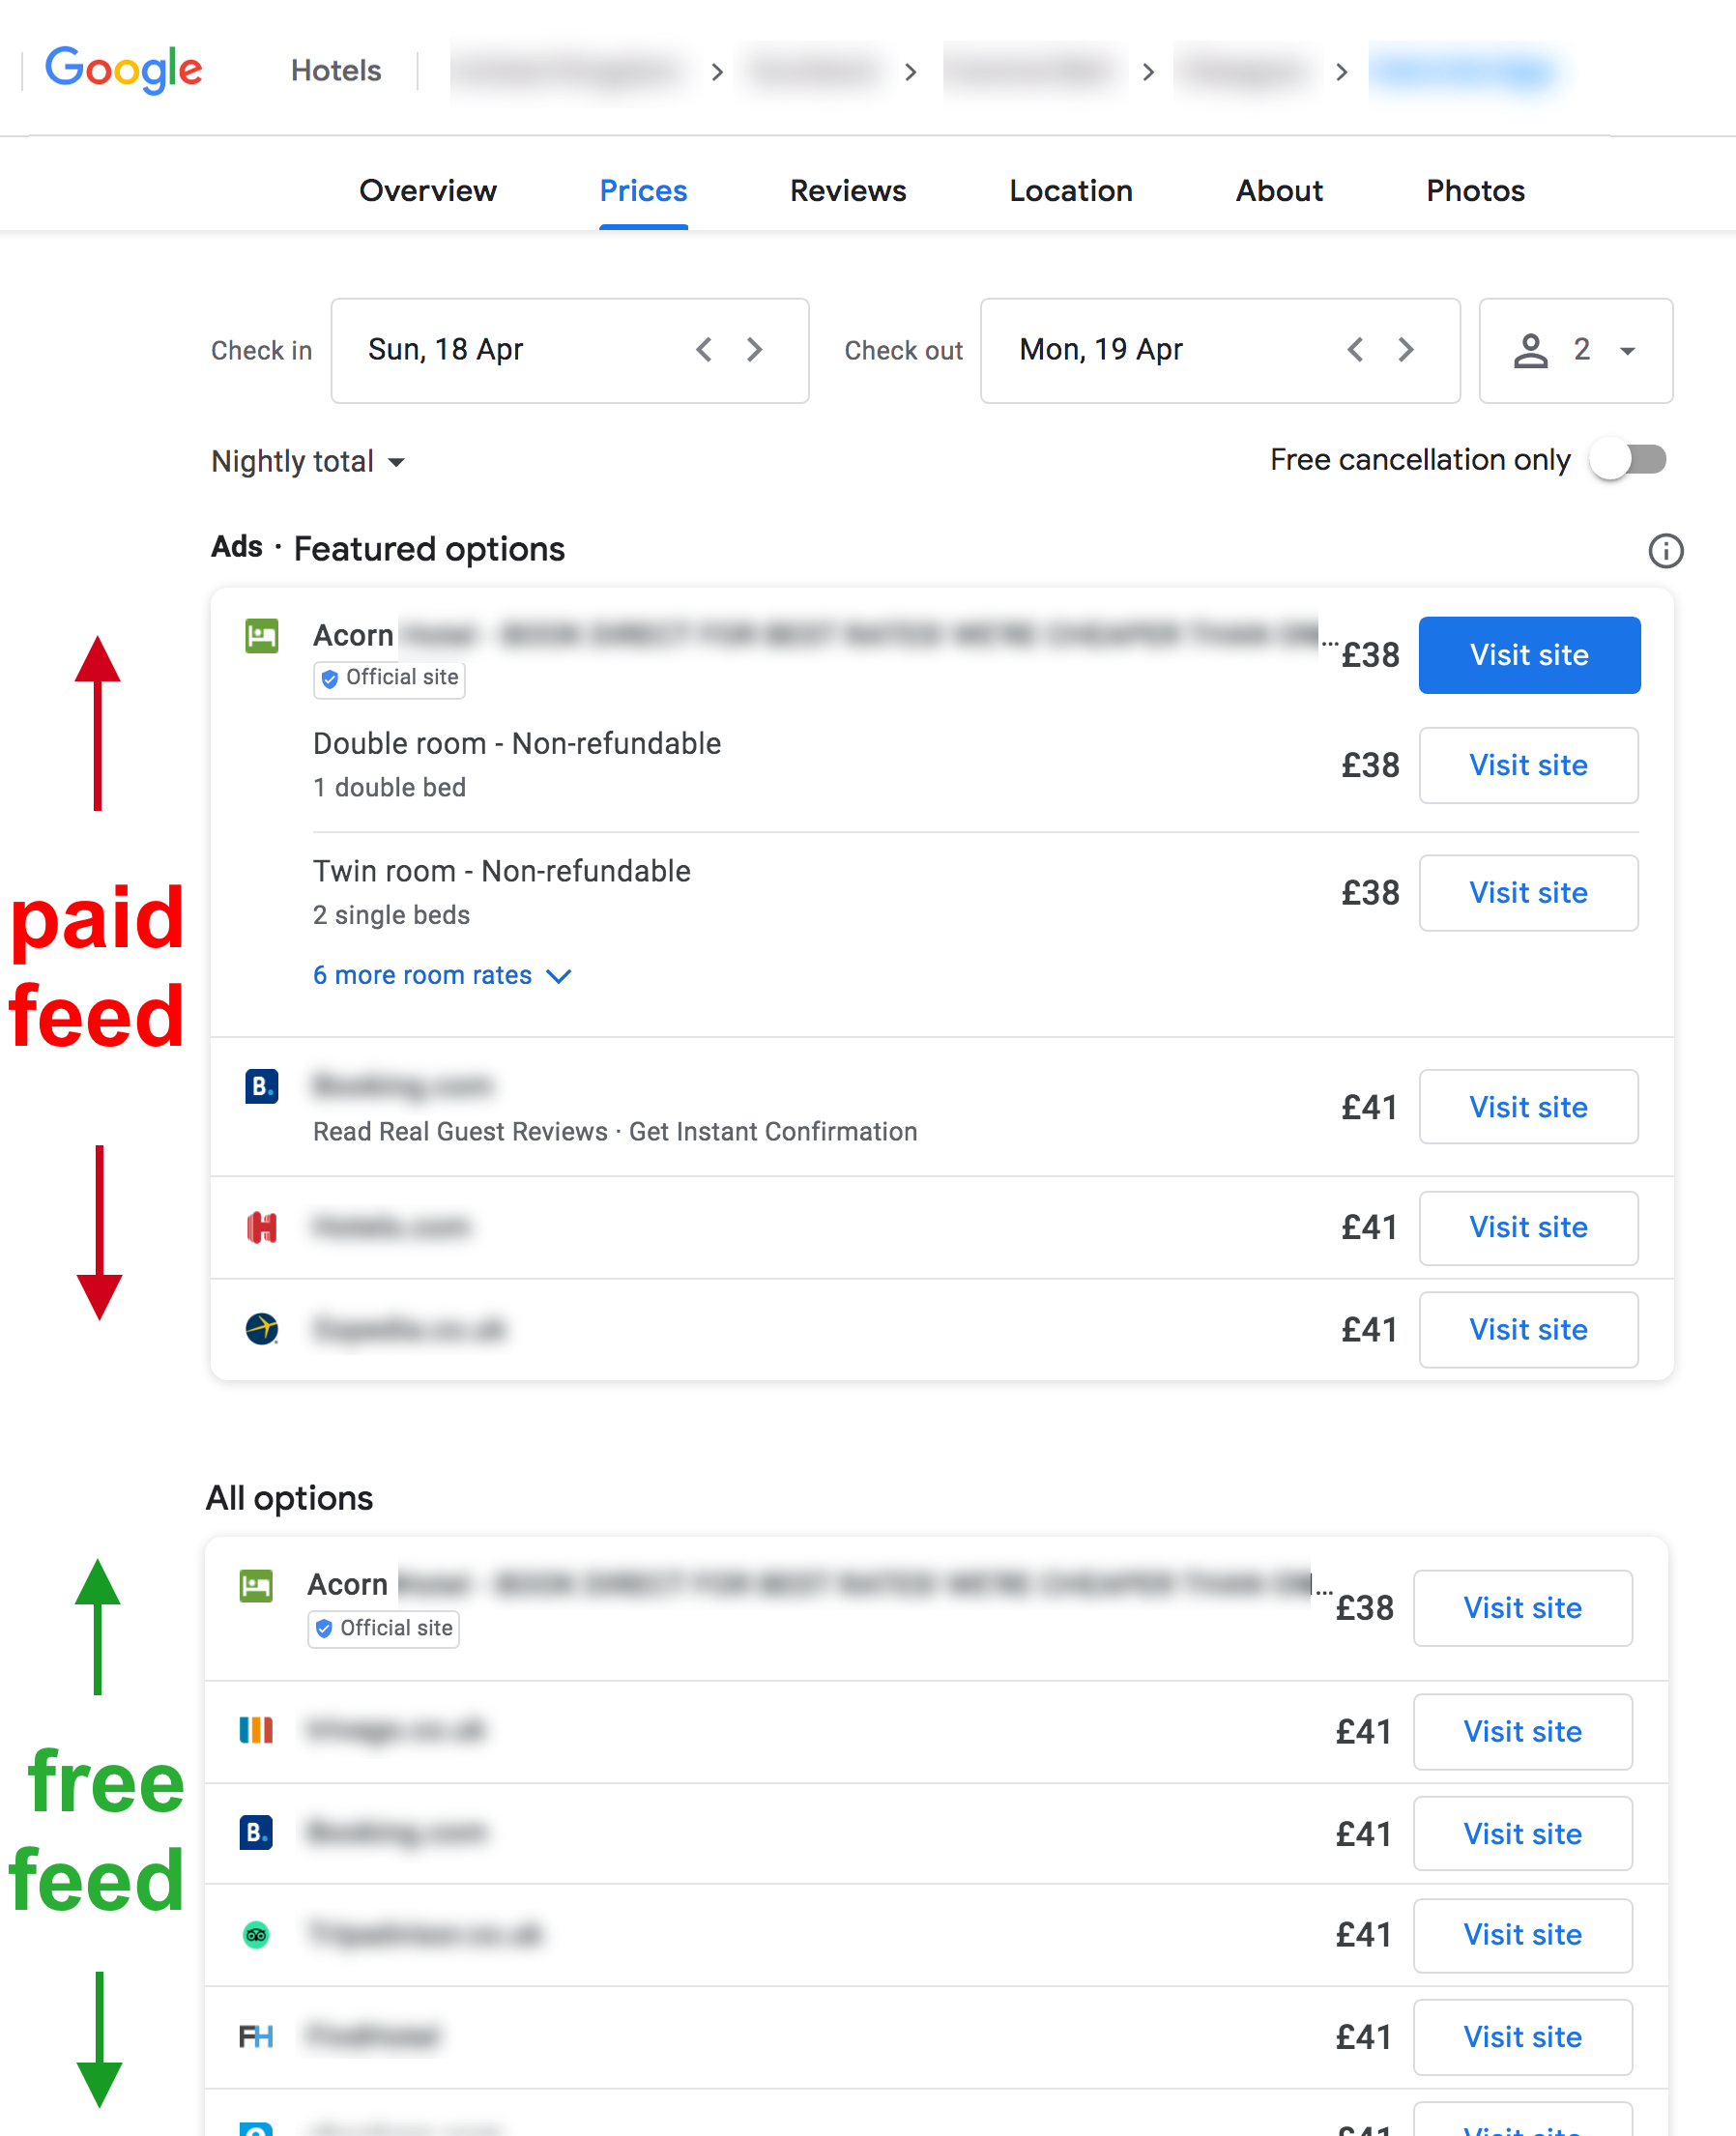 Google free and paid Hotel Ads feeds